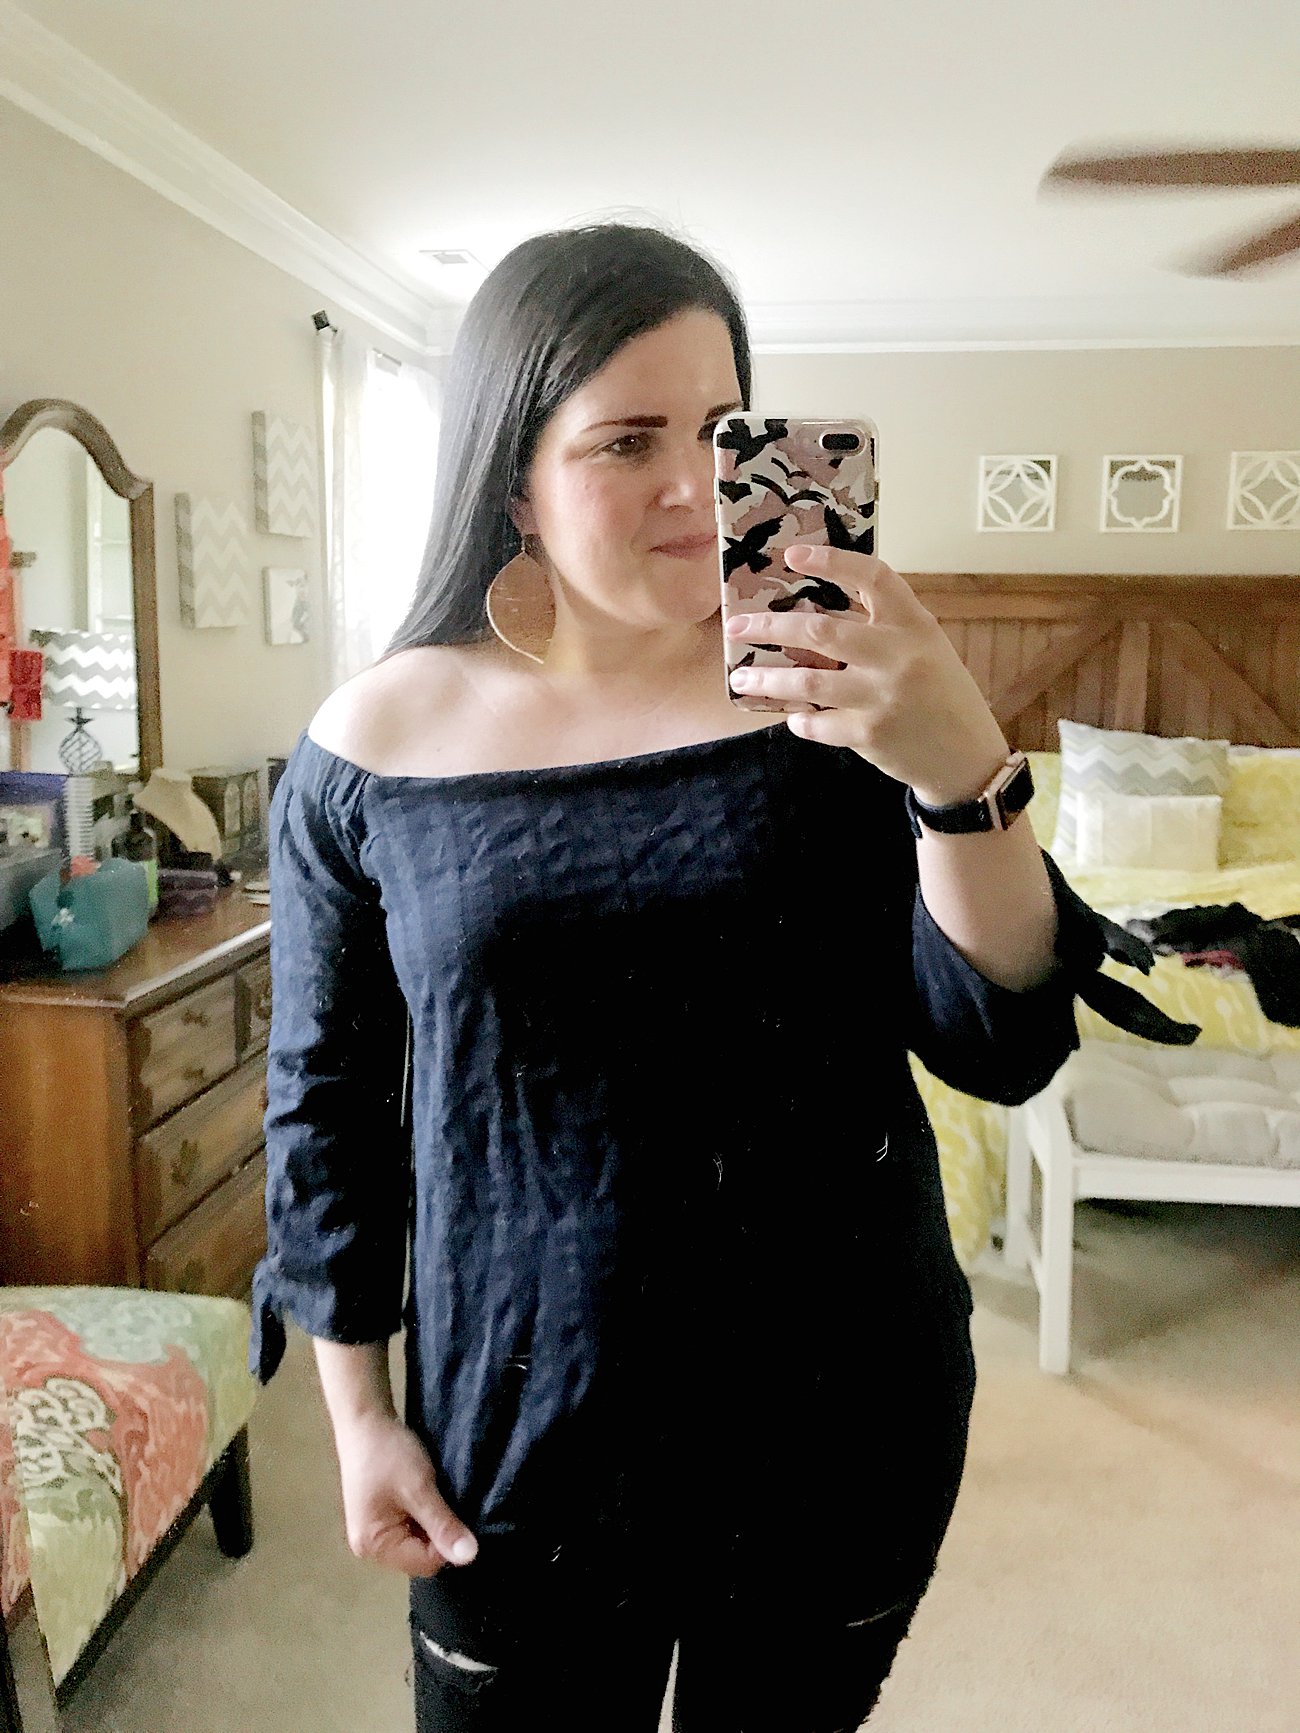 May Stitch Fix Review & $300 Stitch Fix Gift Card Giveaway featured by popular North Carolina fashion blogger, still being Molly